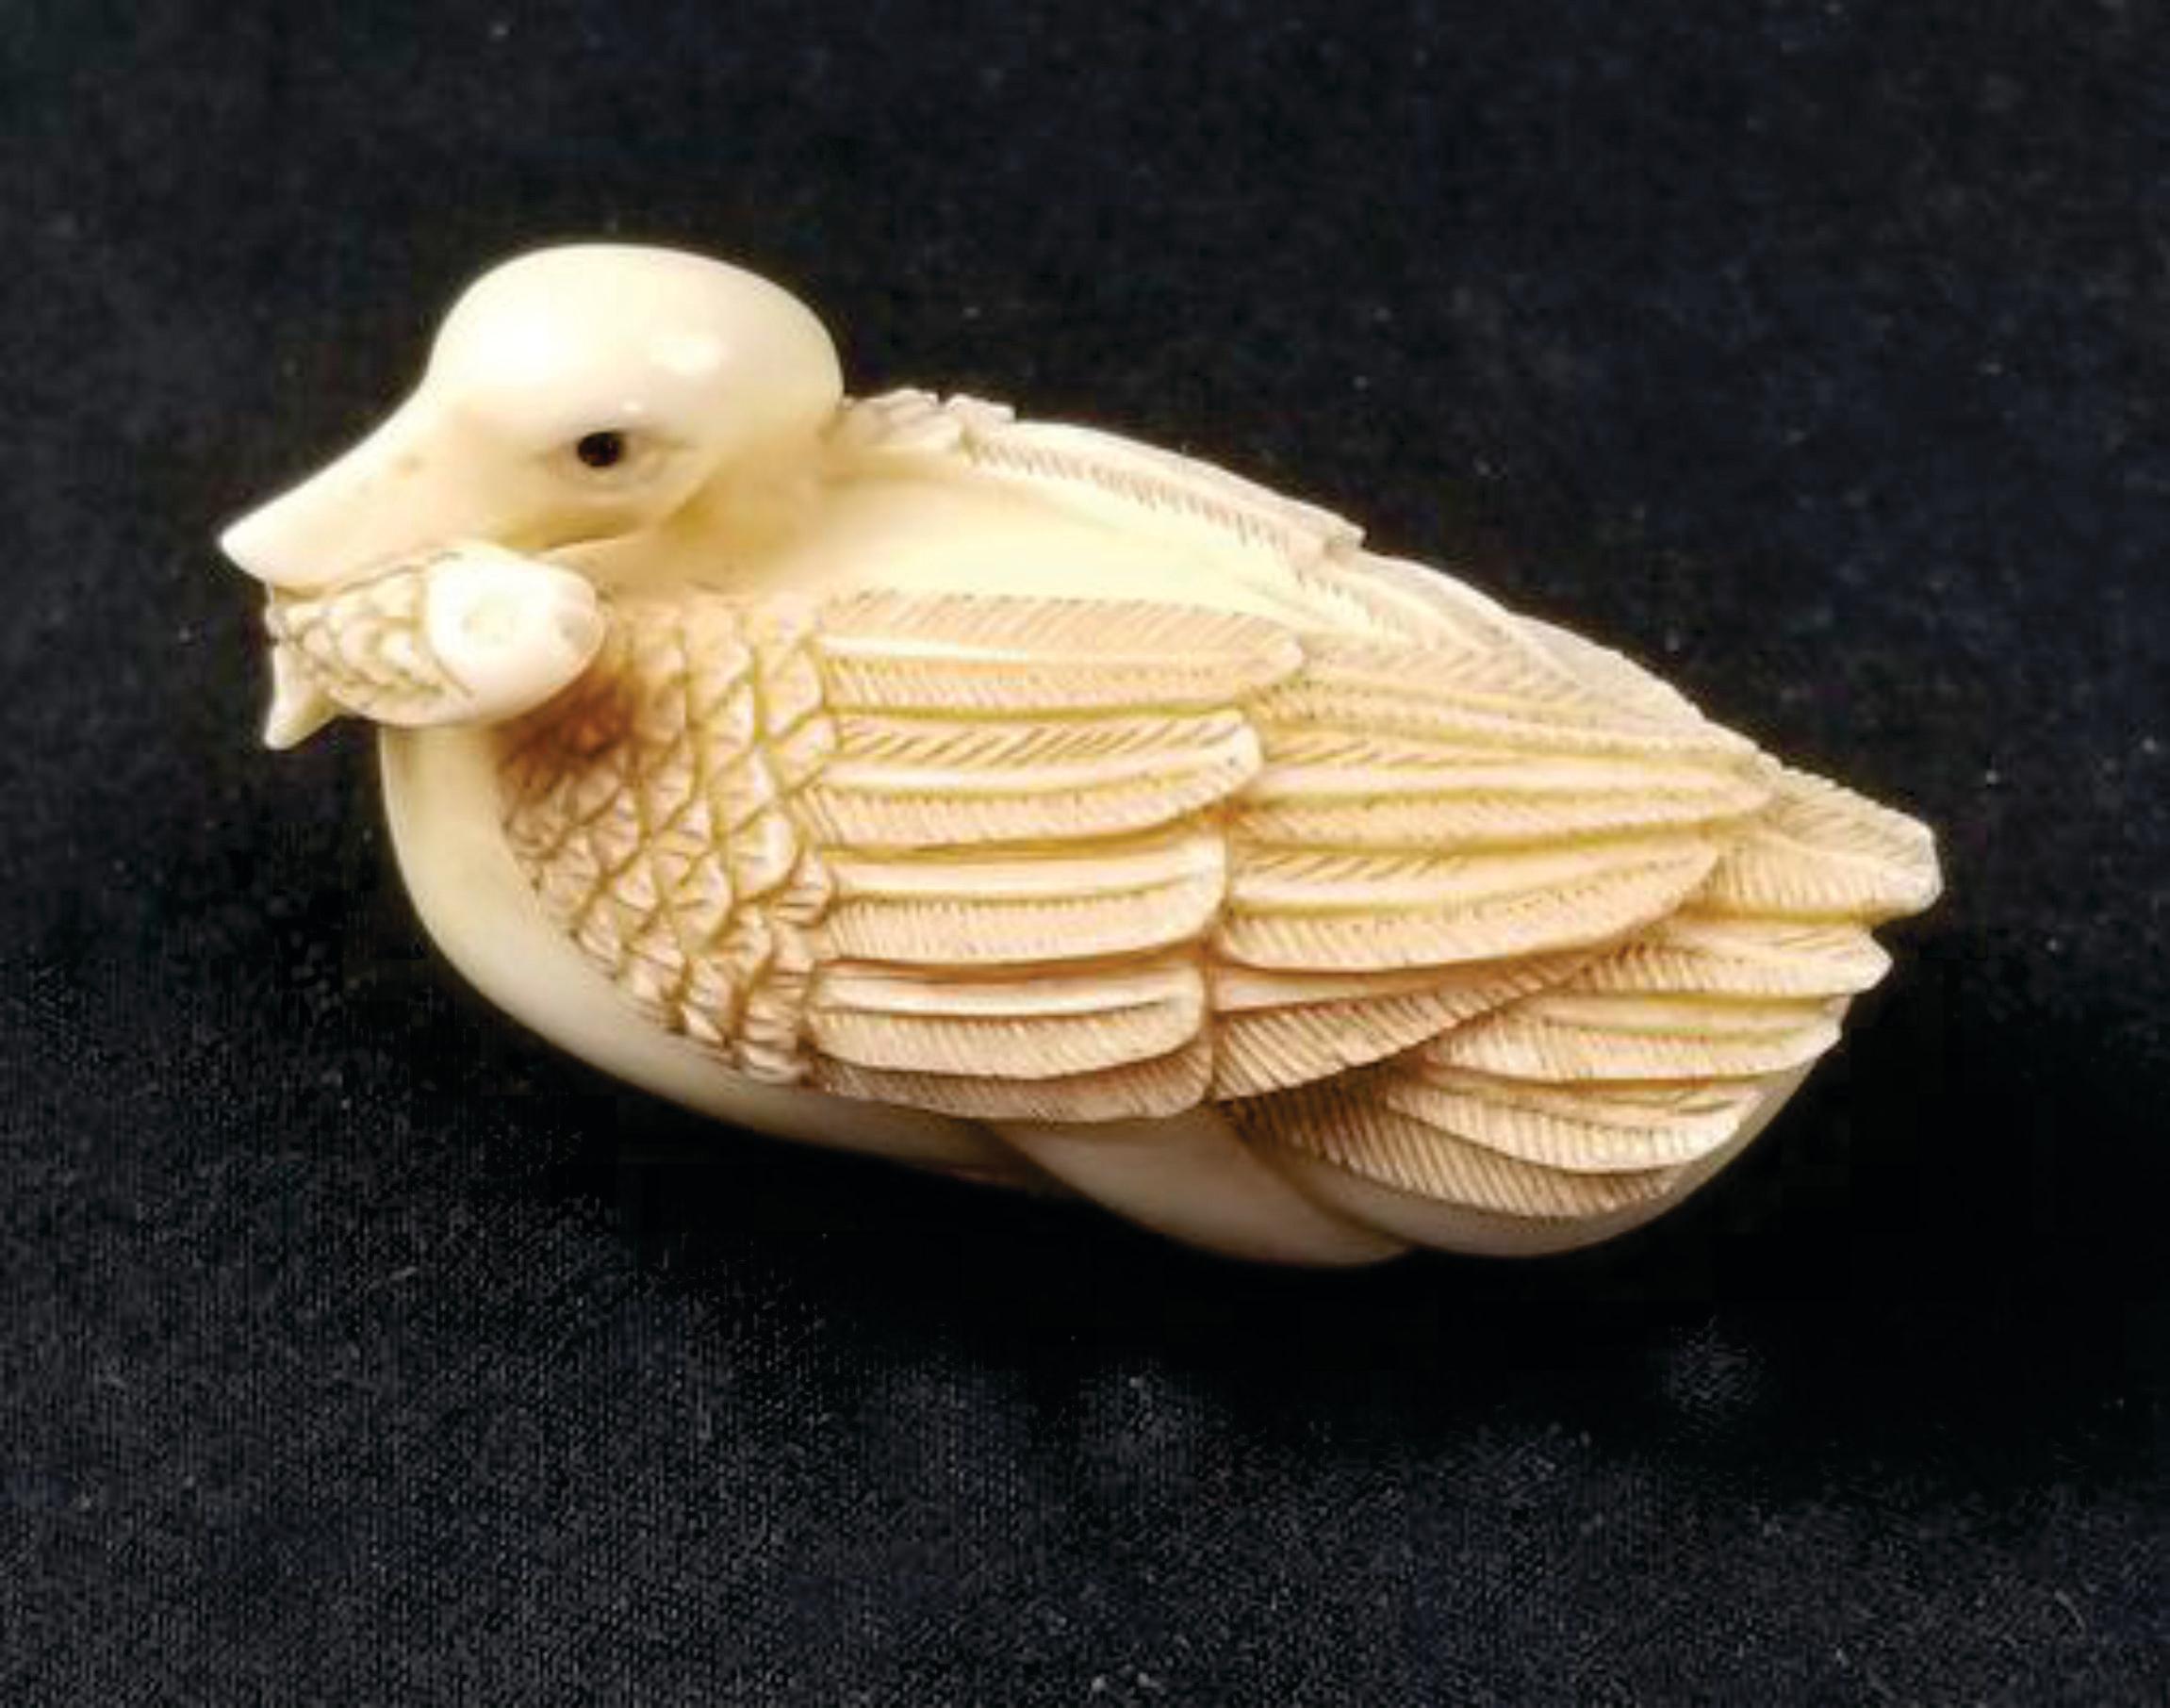 Netsuke Japanese Hand-Carved Mixed Material Figure, A Goose Biting a Fish-Signed by Tomotada from the Edo period. Ric.NA007

This item is 2